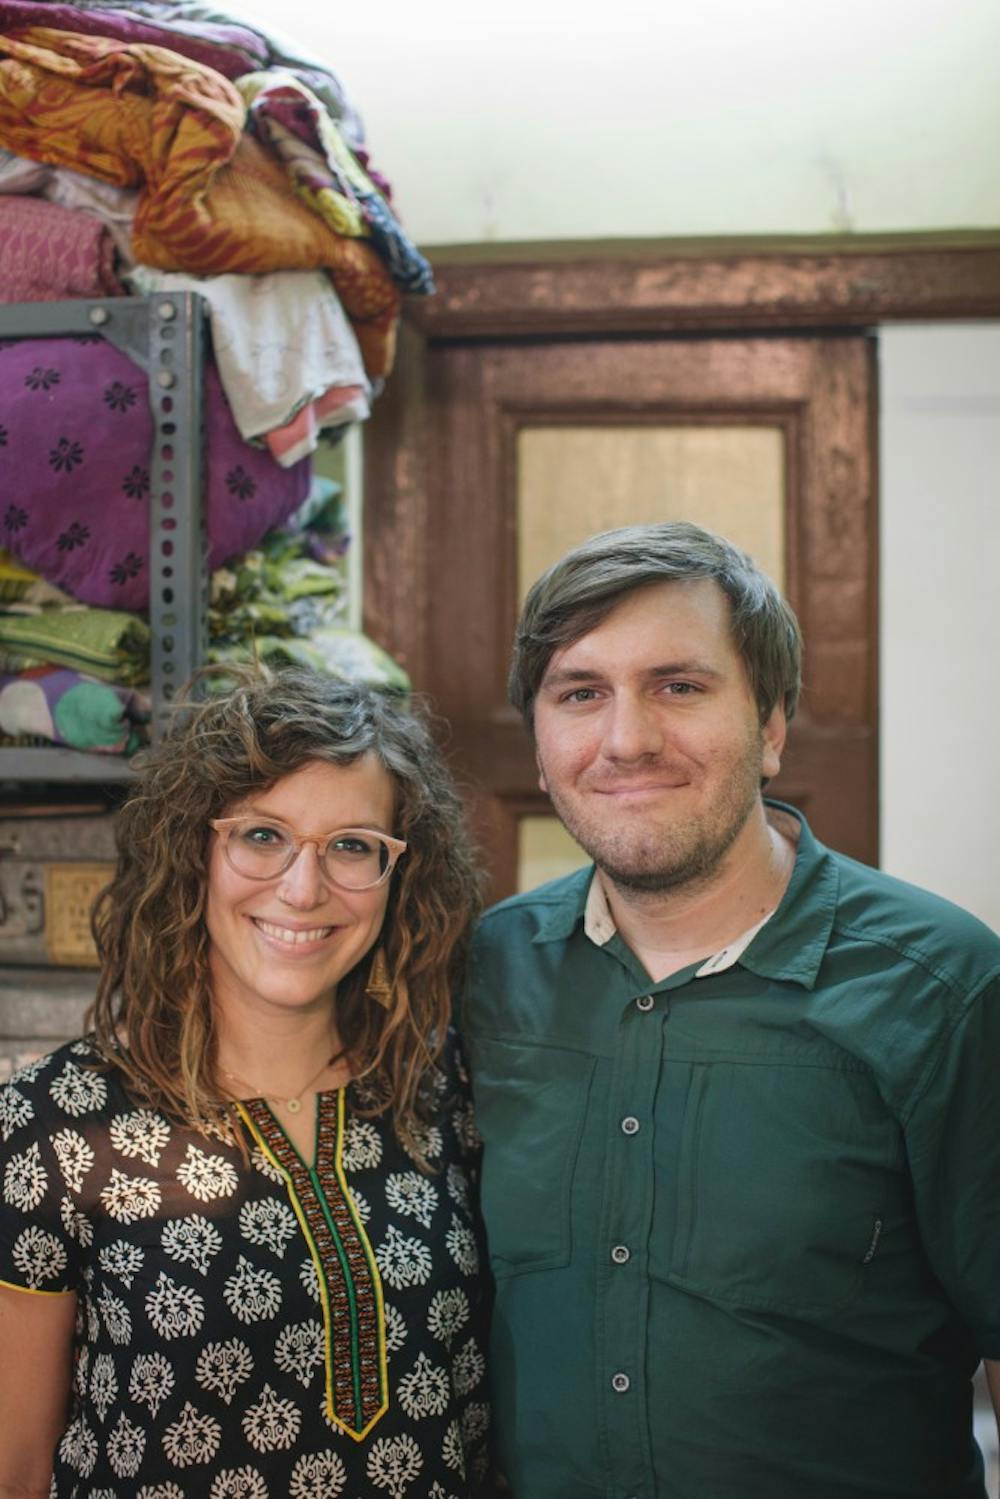 Photographers Frank and Sarah Schweikhardt stand in front of blankets made by women from Sari Bari, an organization that helps women in India leave the sex trafficking by training them as artisans. The photos documenting their time at Sari Bari will be displayed in downtown Bloomington at Gather until Jan. 31.